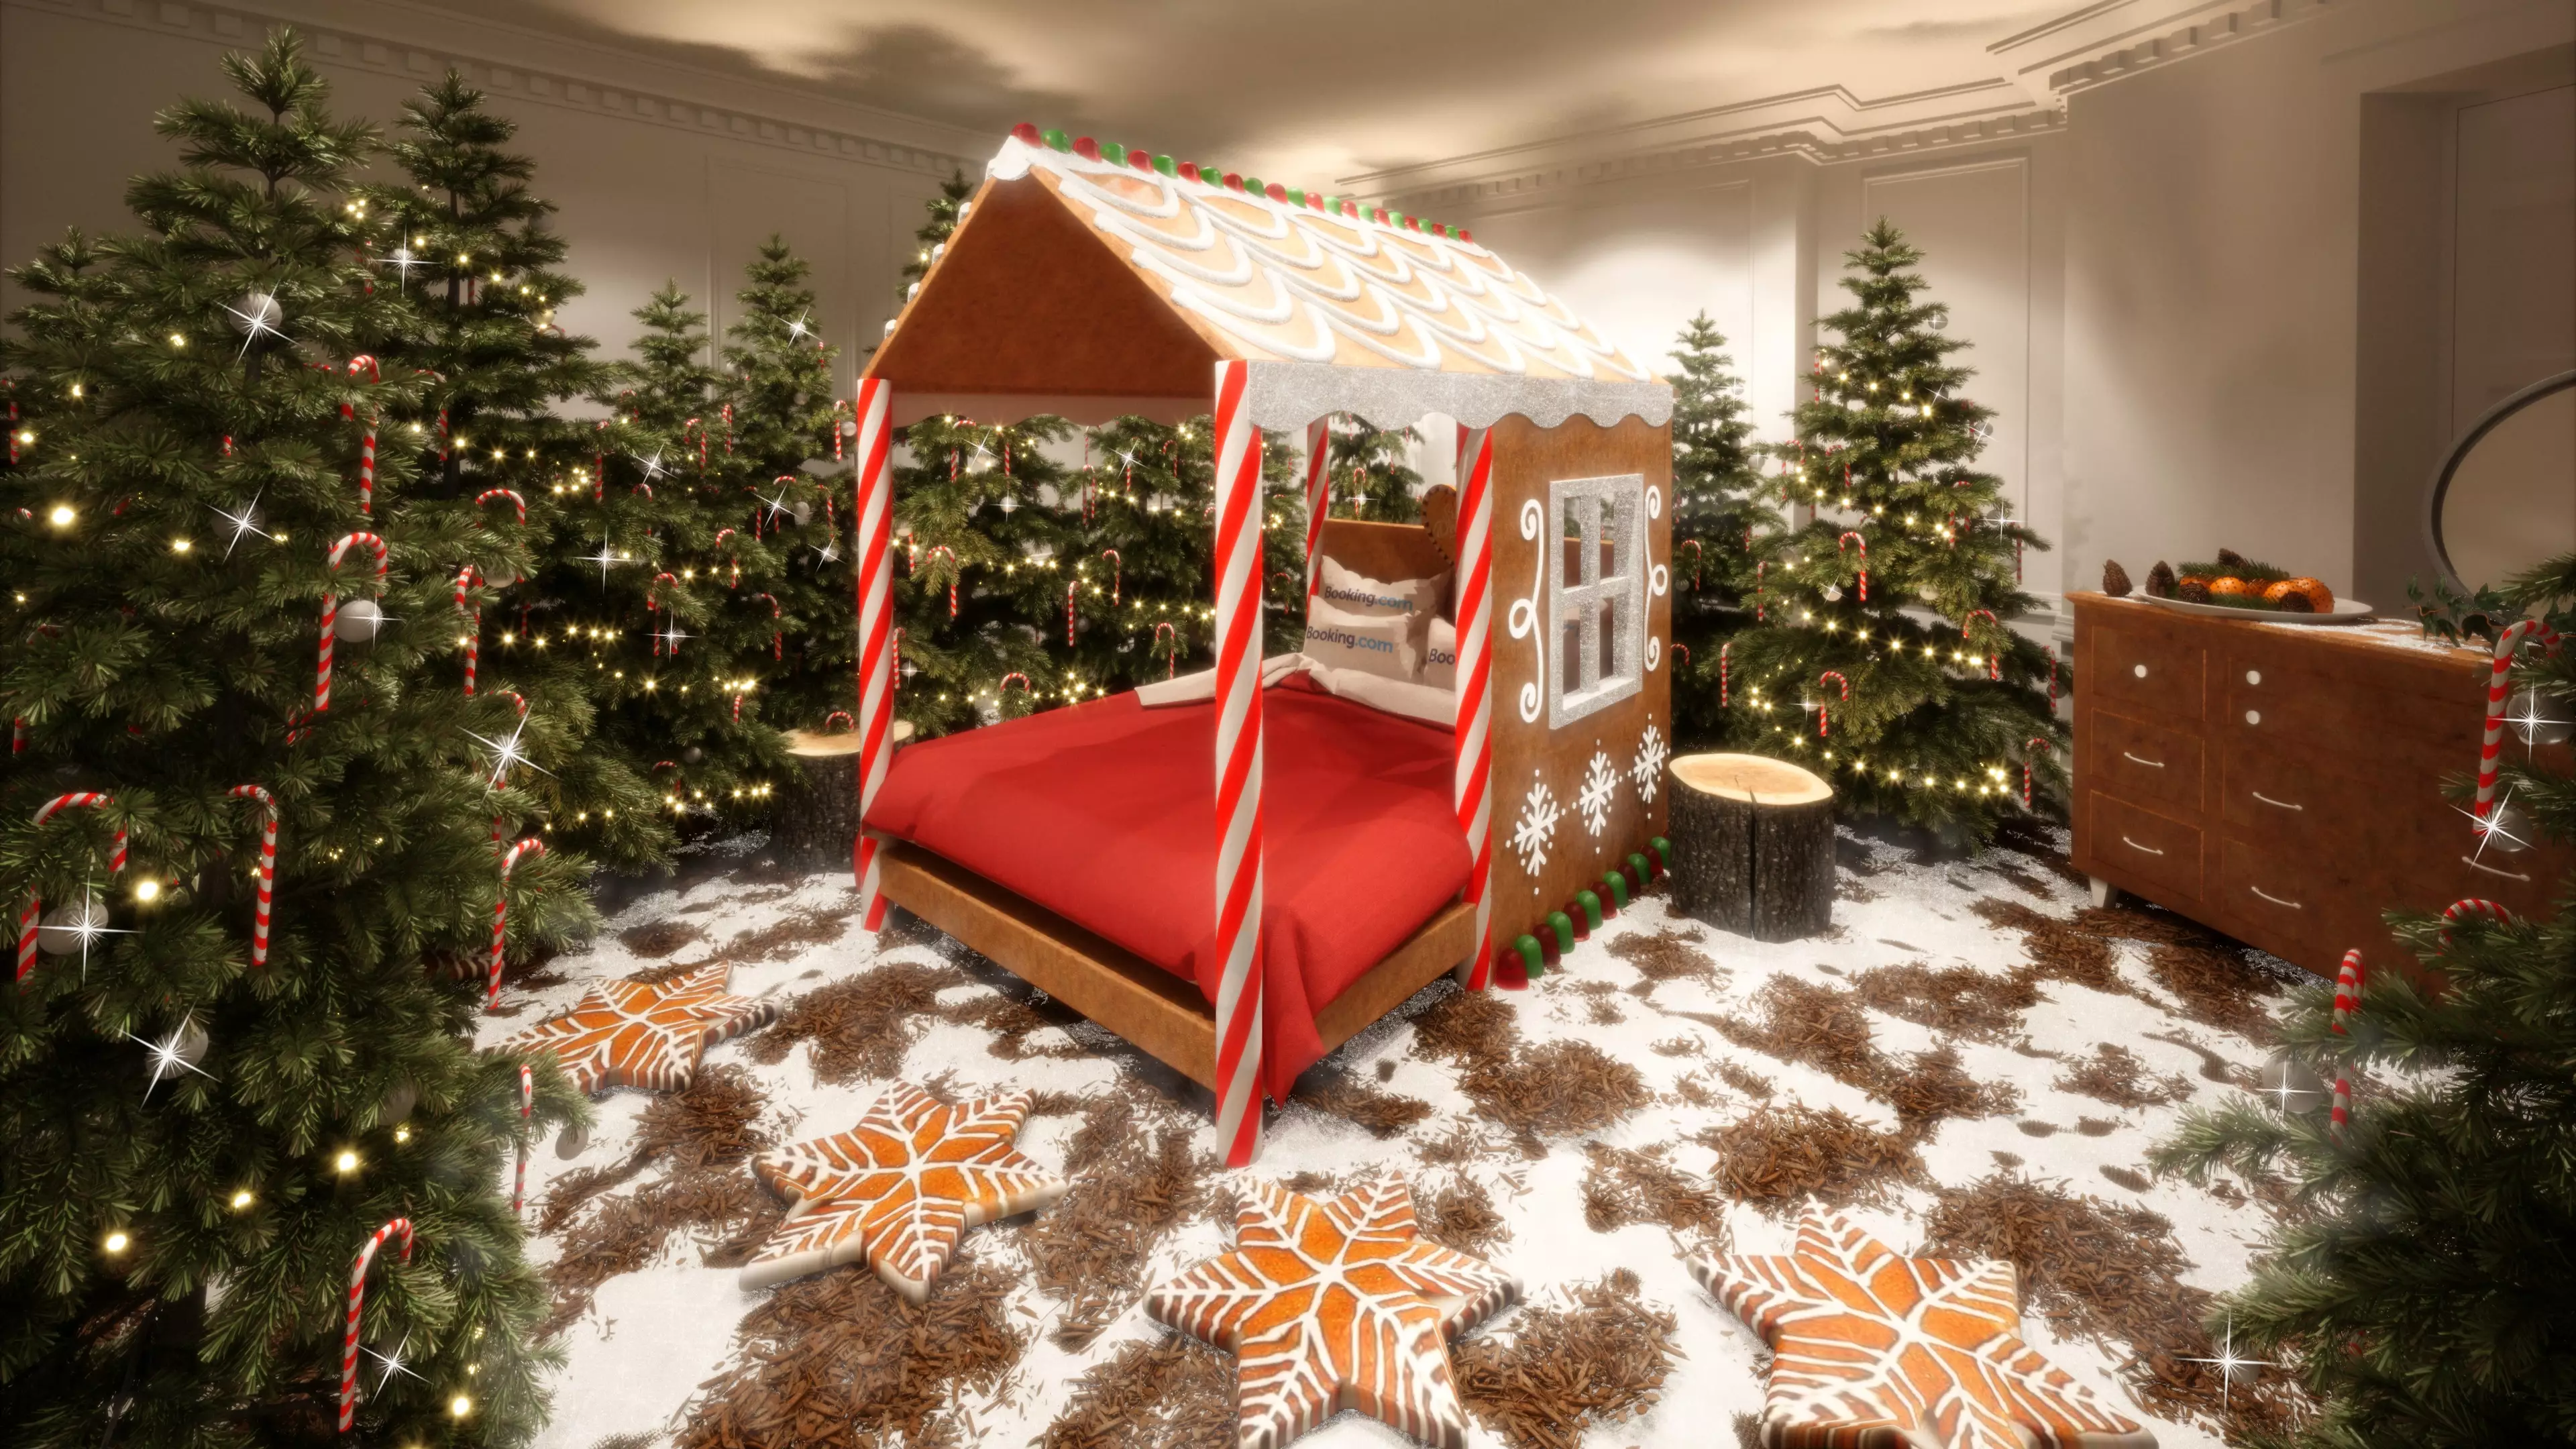 You Can Now Stay In A Candy Cane House And It's Pure Christmas Magic